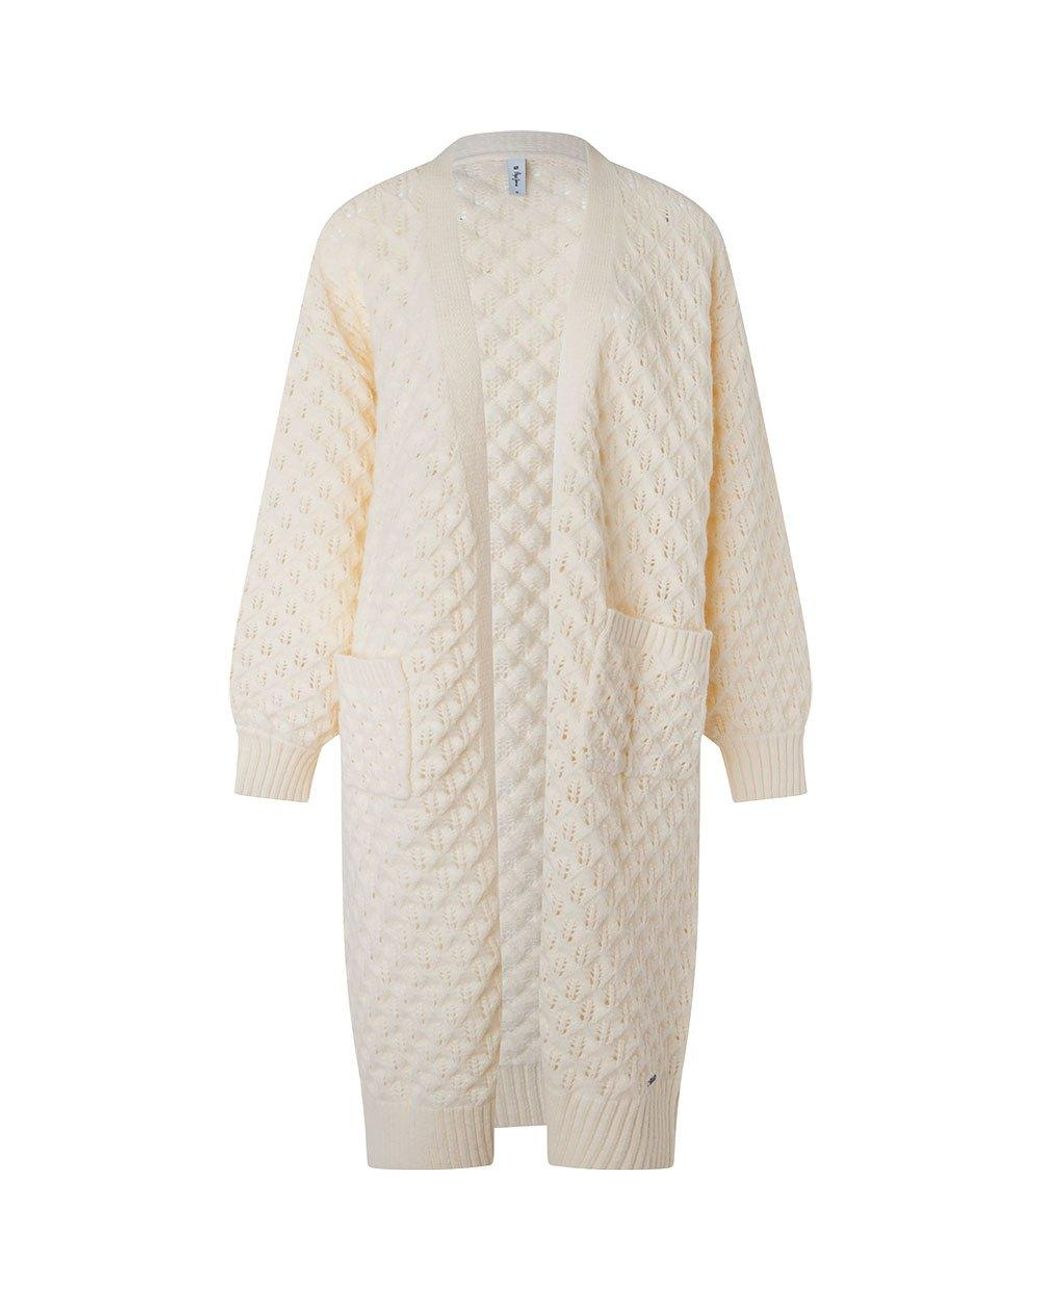 Pepe Jeans Beatrix Cardigan in White | Lyst